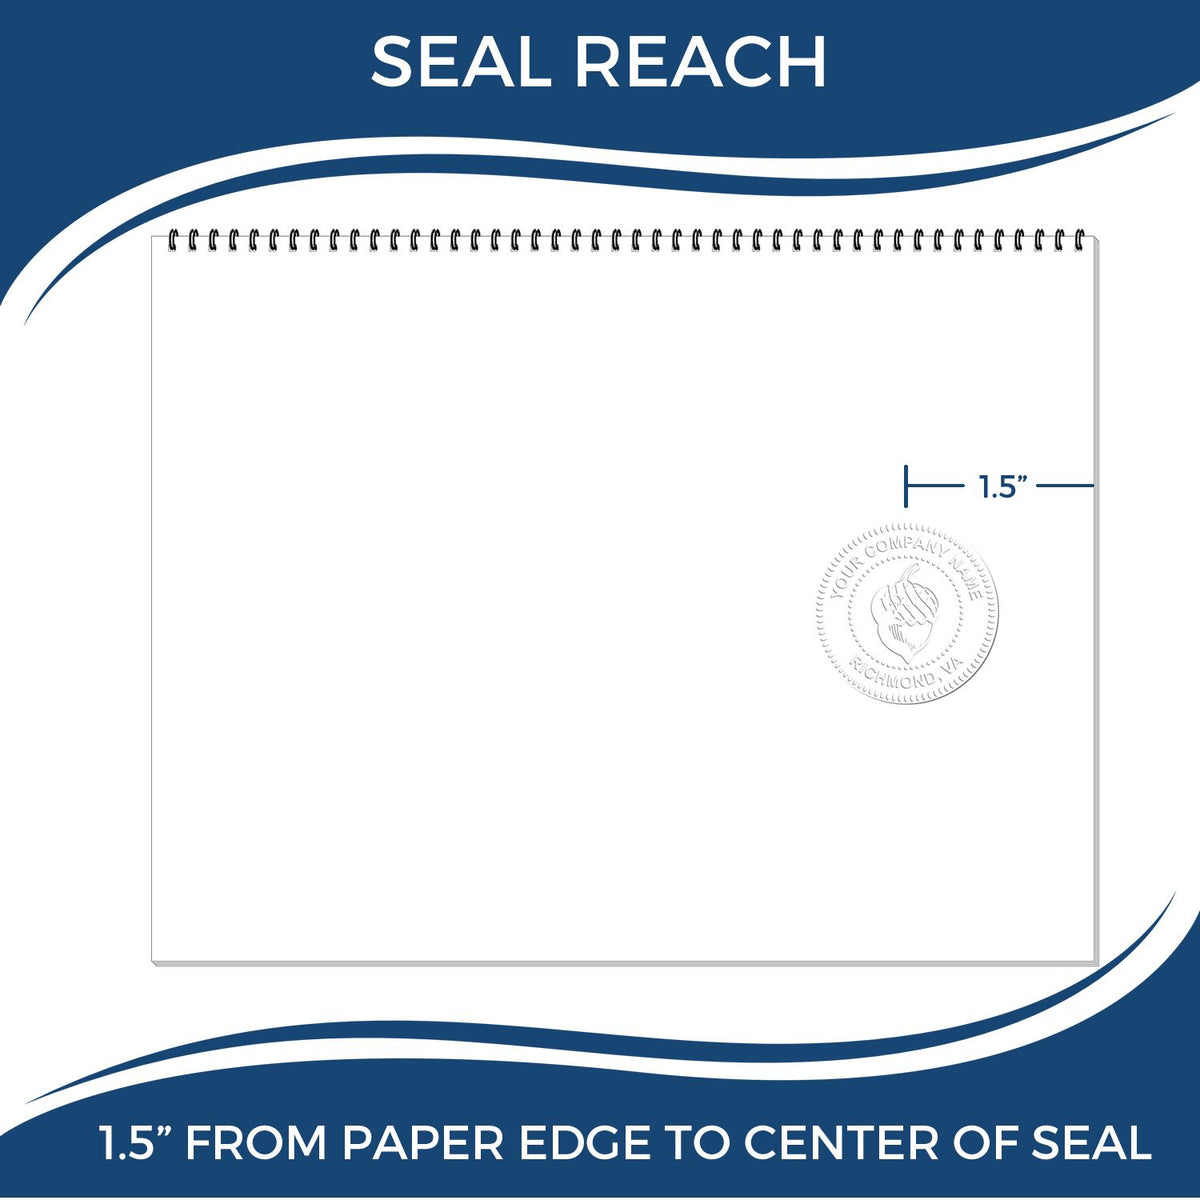 An infographic showing the seal reach which is represented by a ruler and a miniature seal image of the Gift Indiana Architect Seal